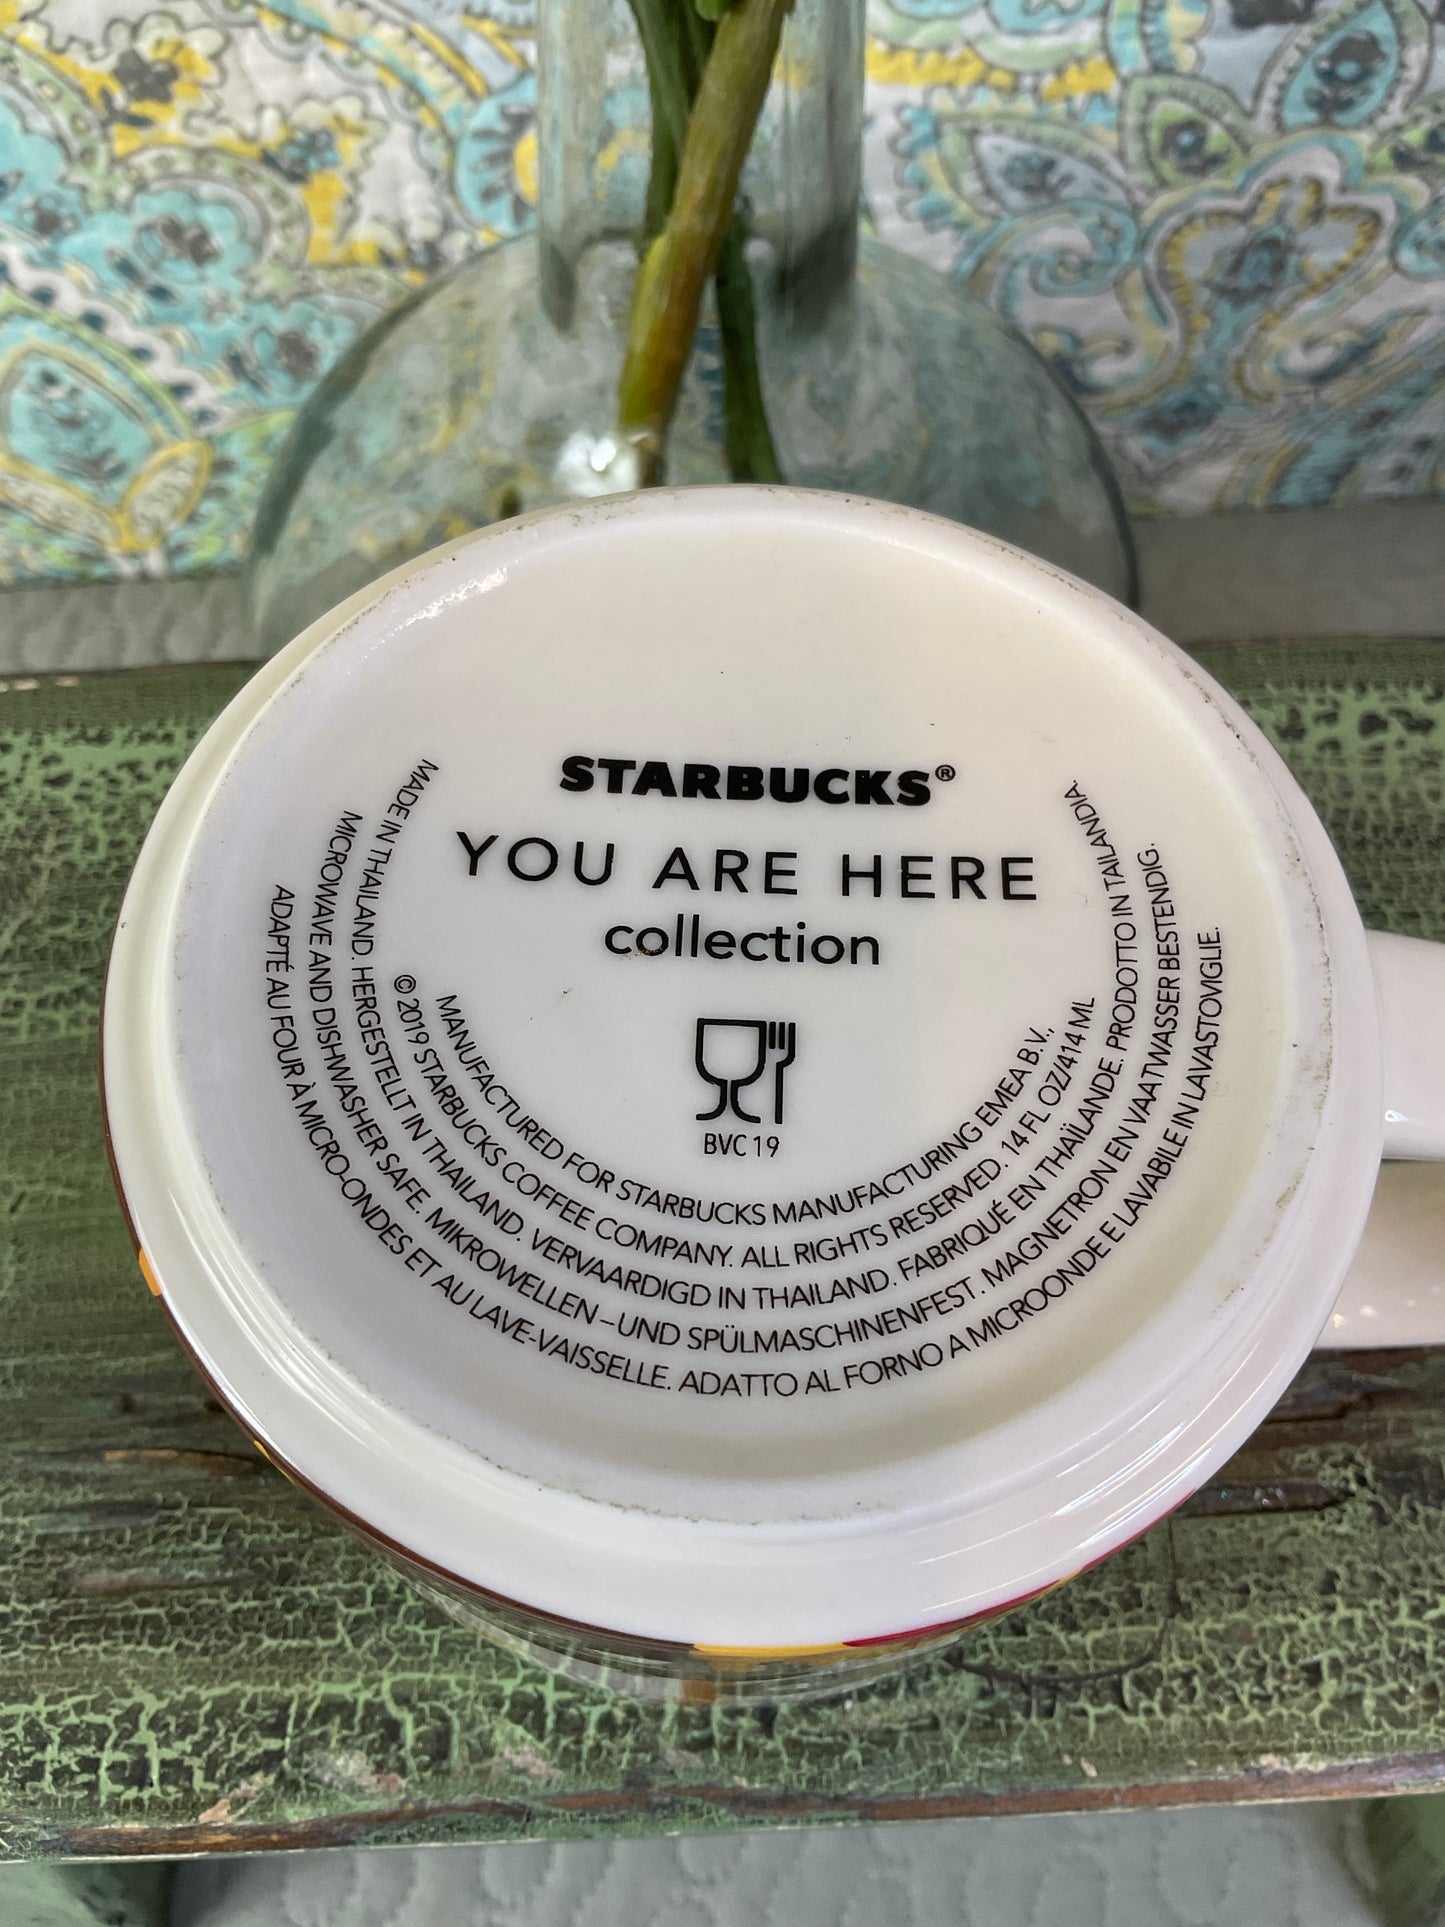 Starbucks You Are Here Collection, Munchen 14 fl oz. Mug